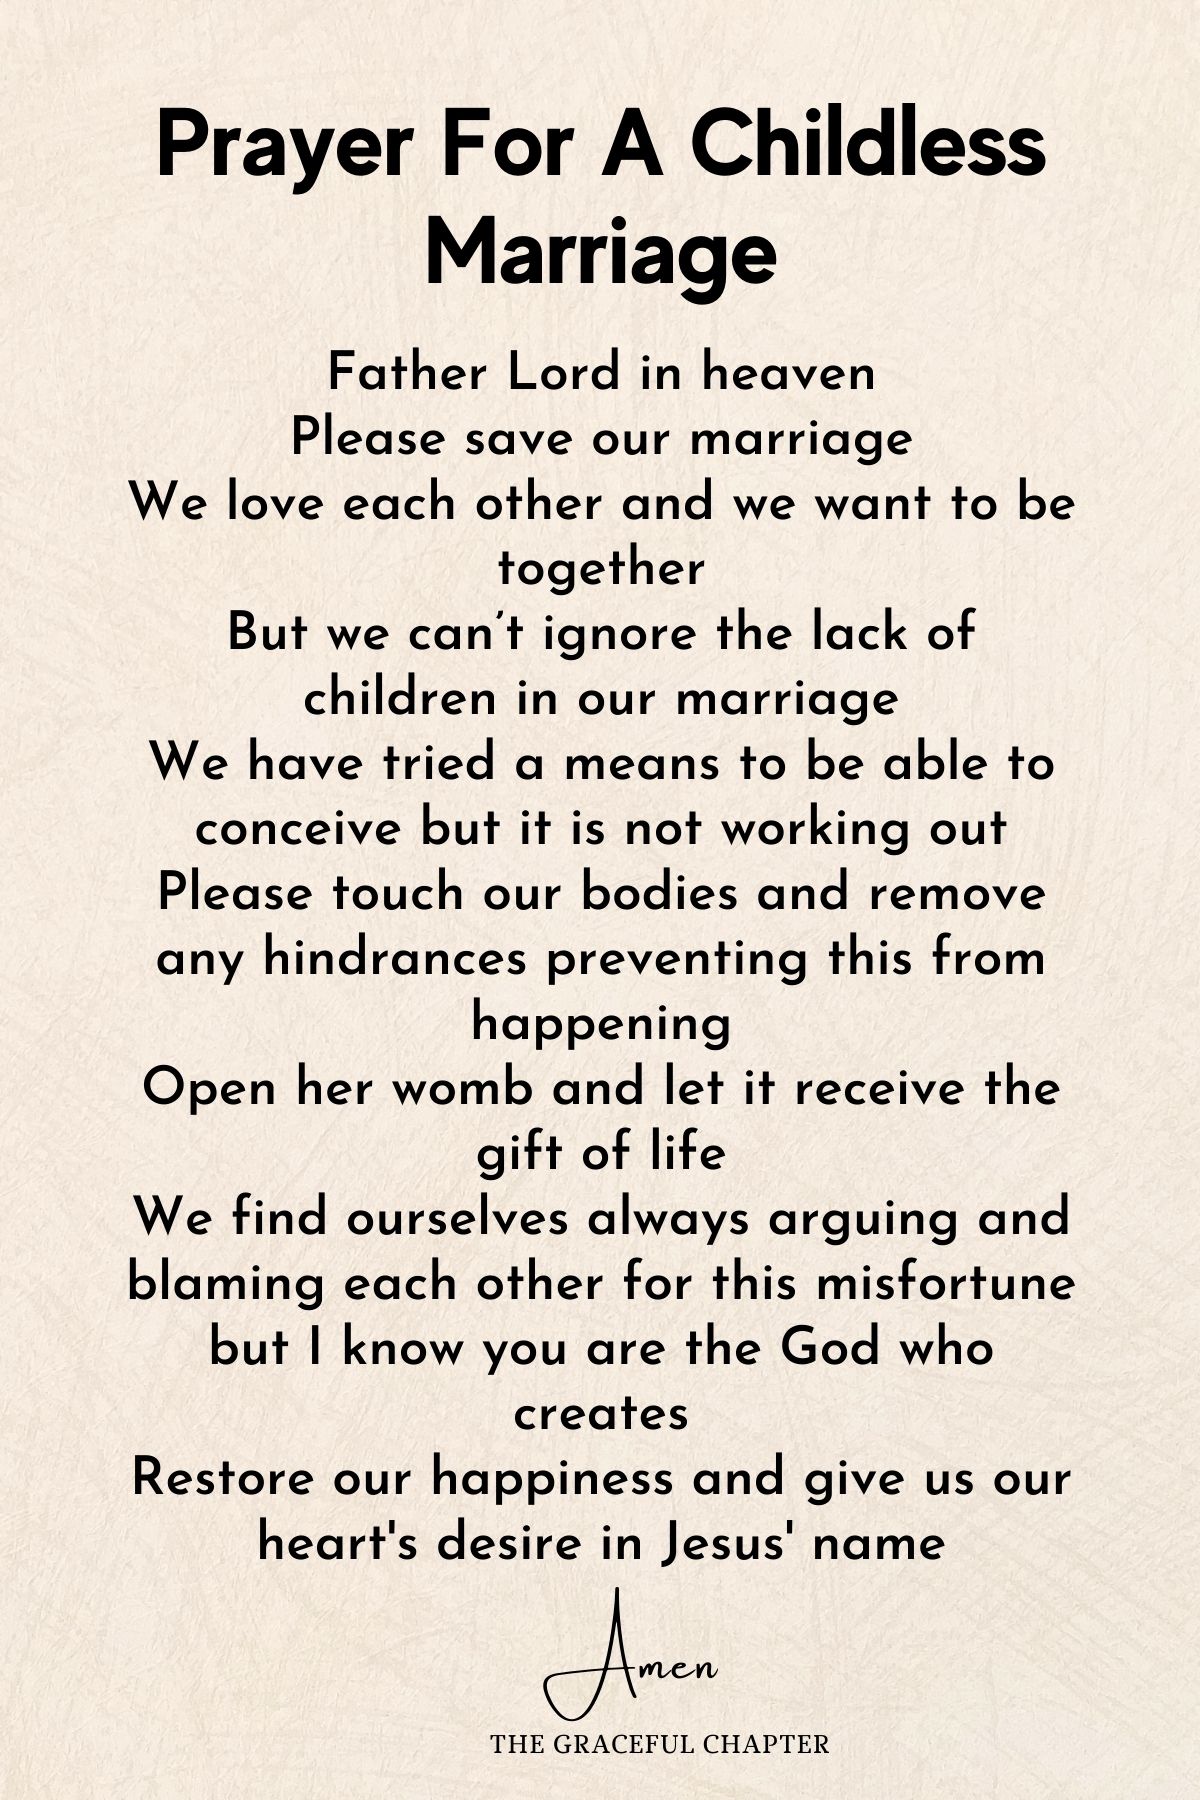 Prayer for a childless marriage